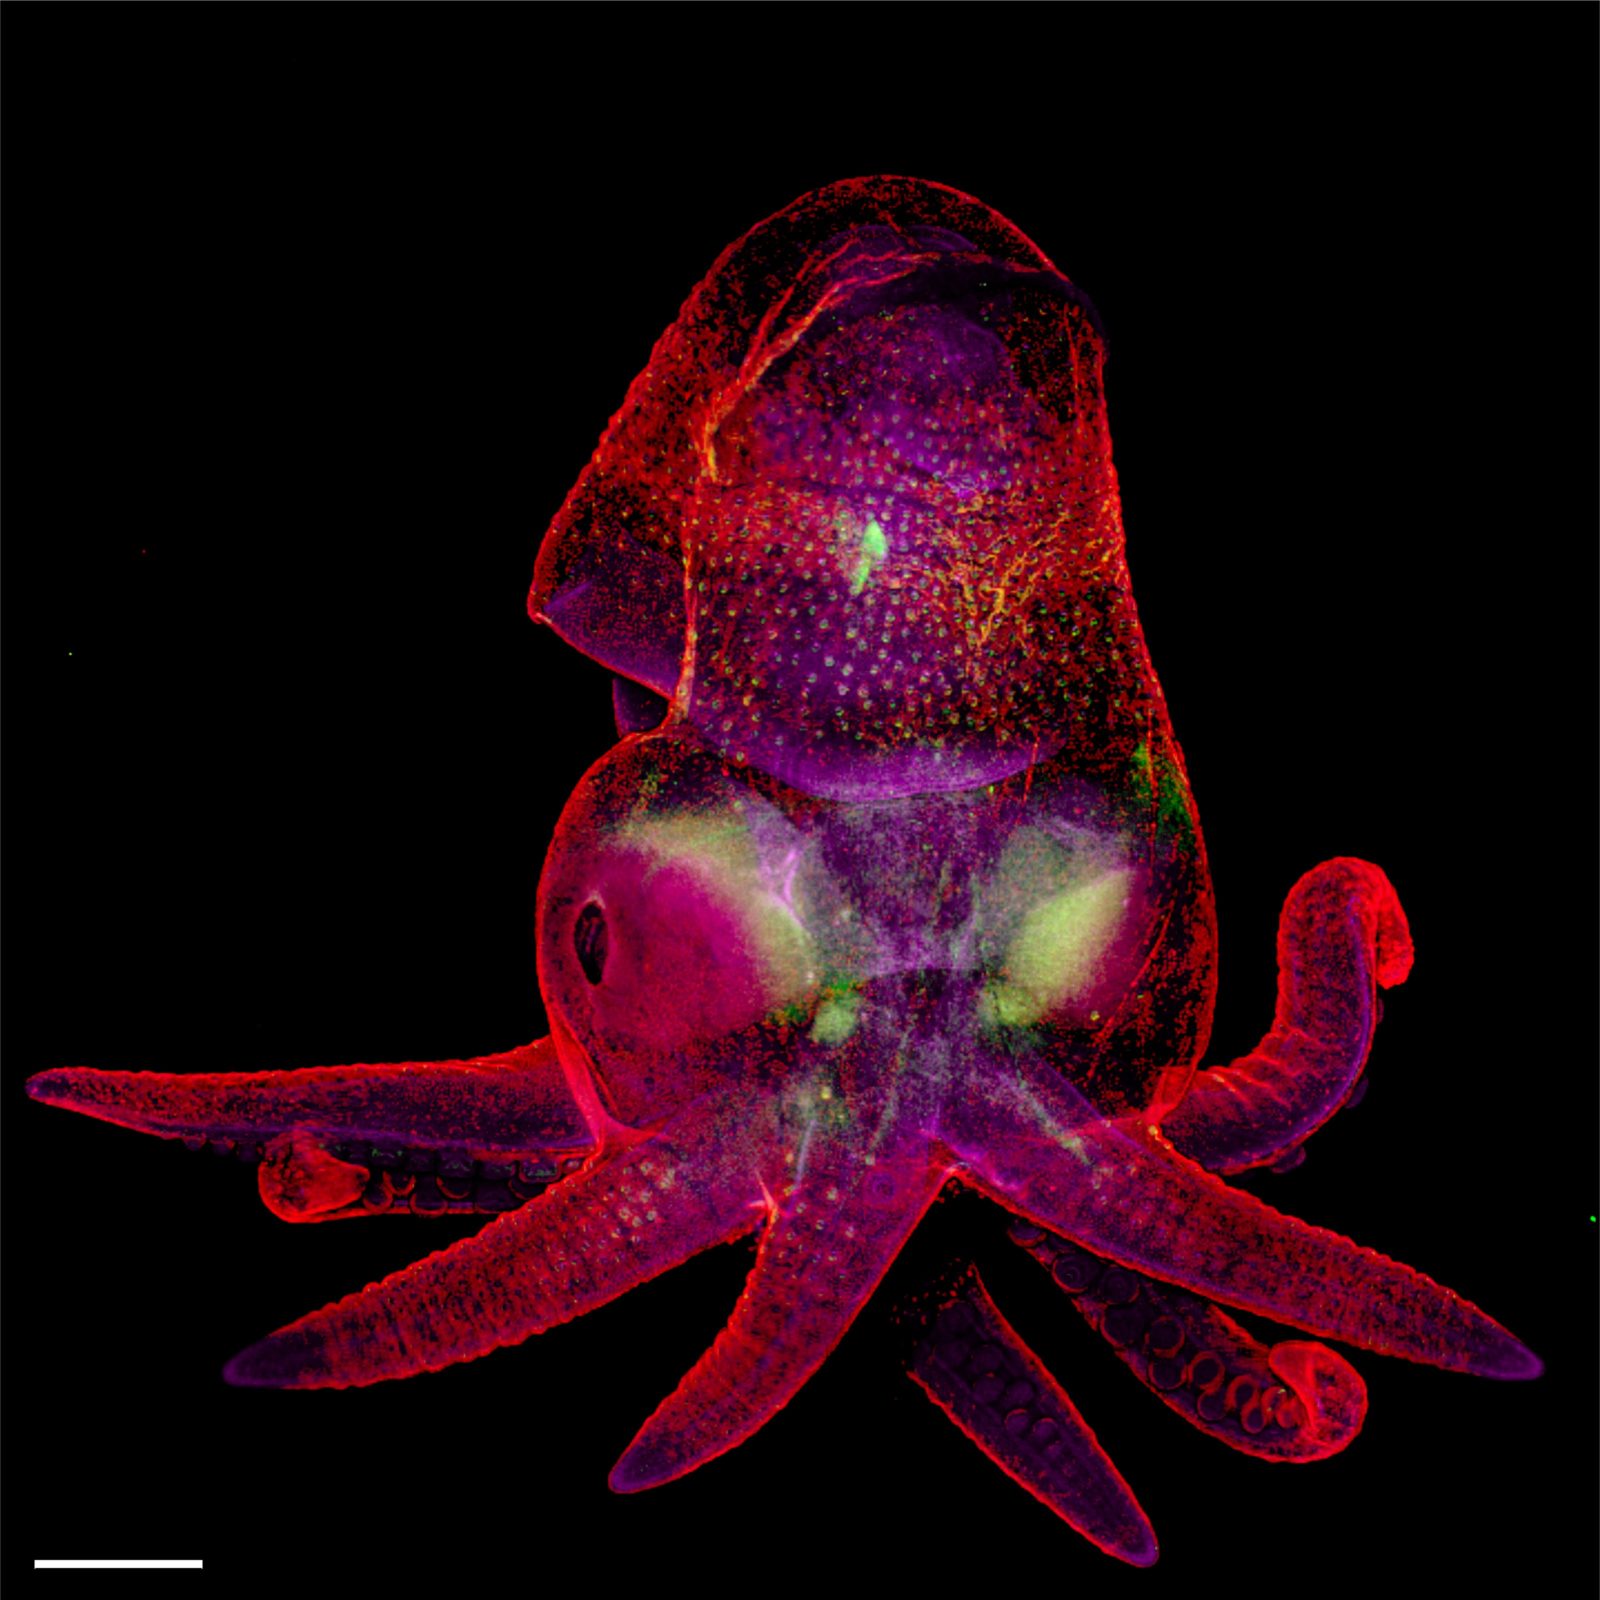 Octopus bimaculoides embryo | 2019 Photomicrography Competition | Nikon's  Small World